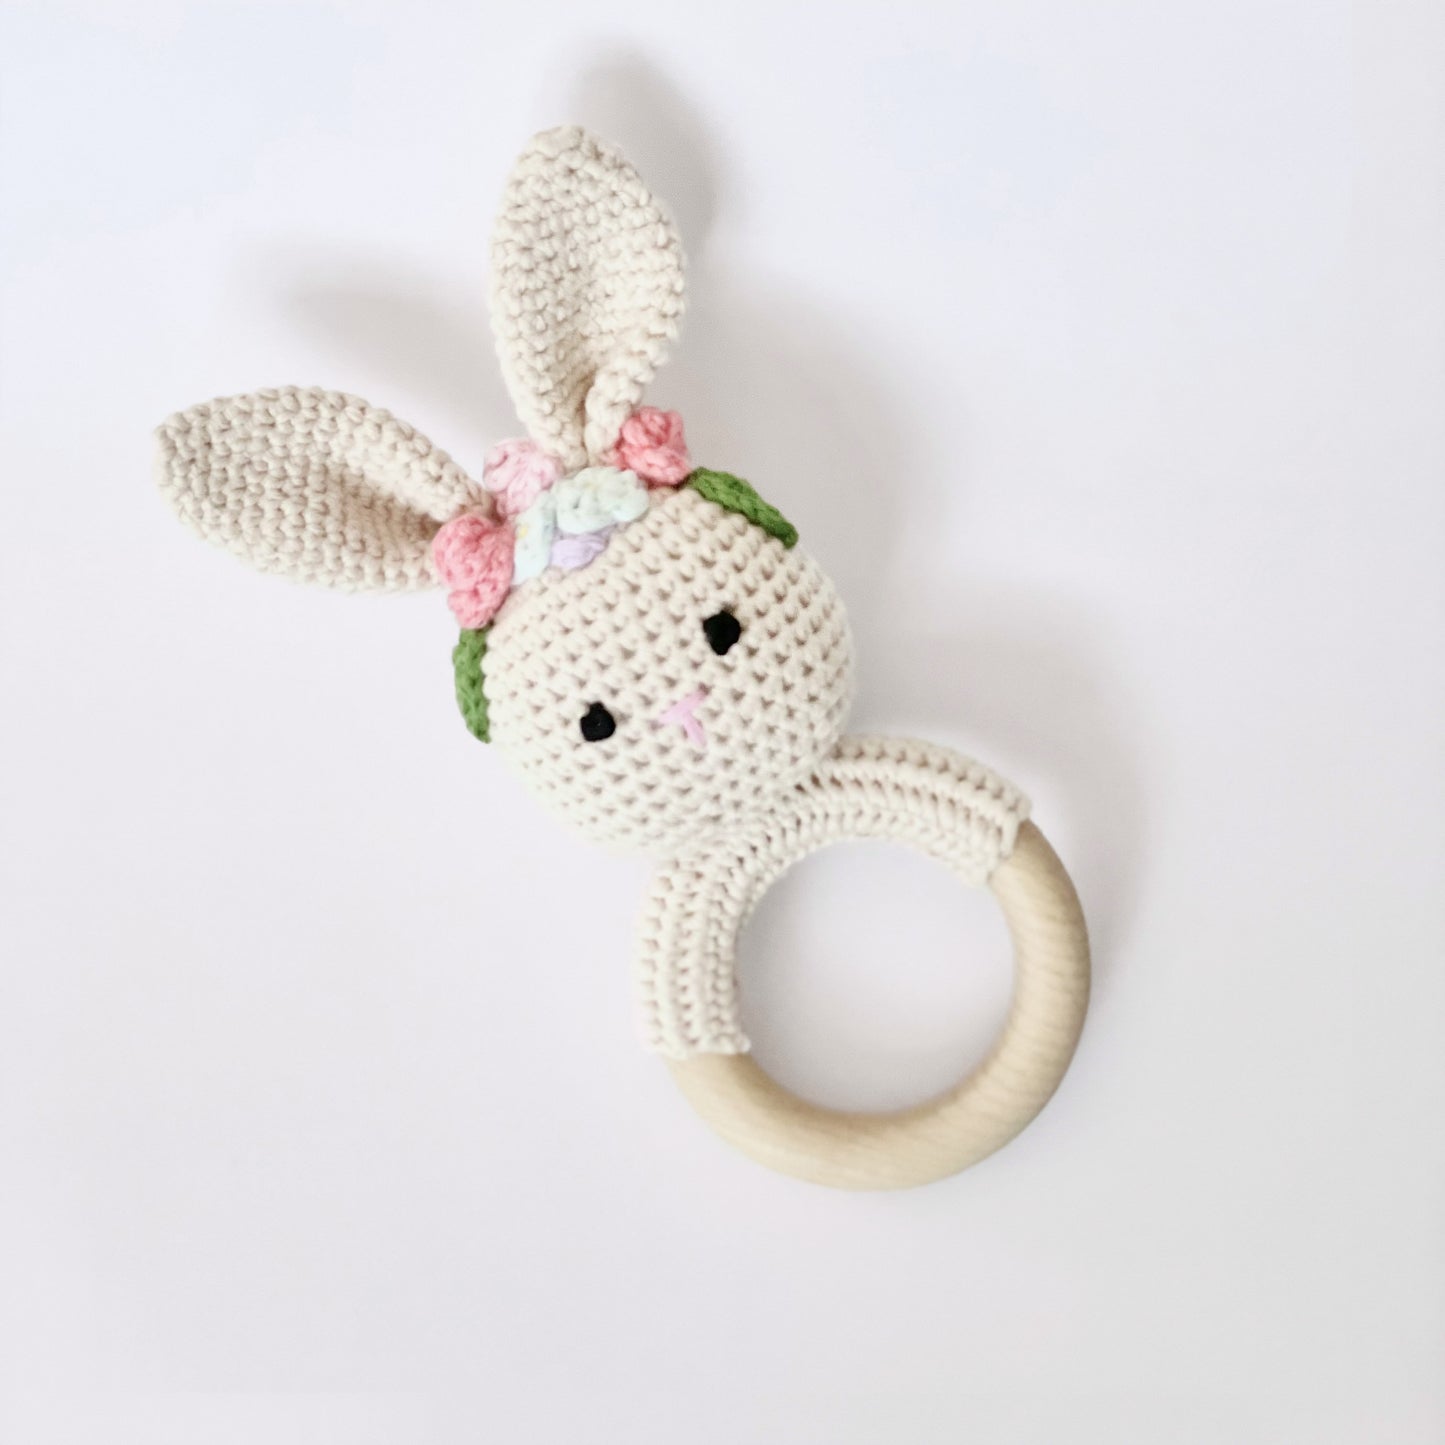 Bunny with Flower Crown Rattle